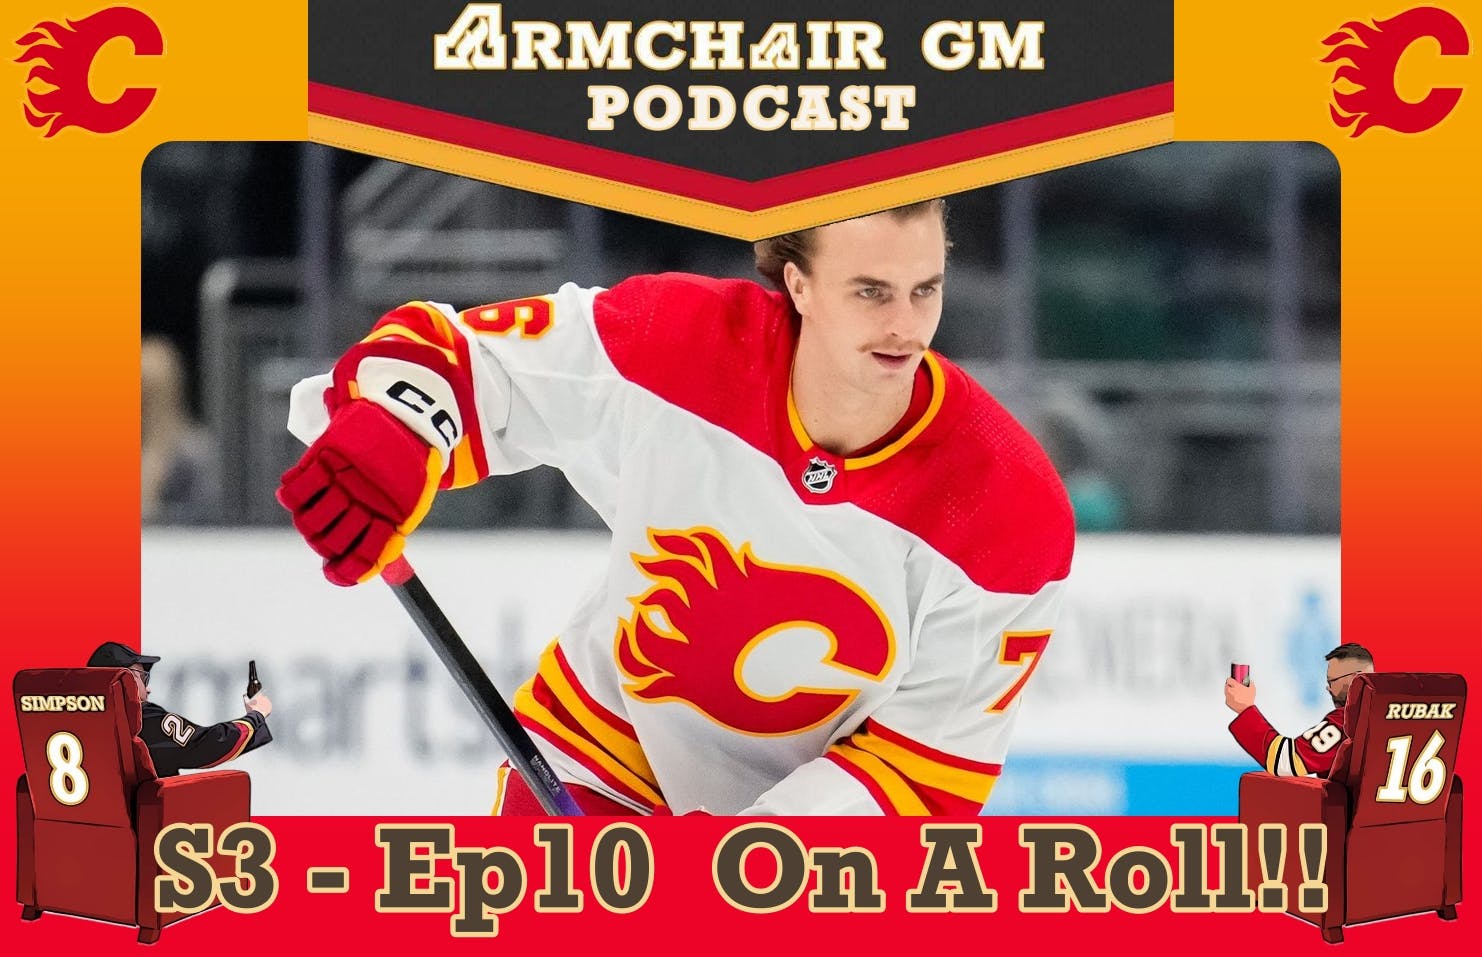 ArmChair GM Podcast S3 - Ep10 On A Roll!!